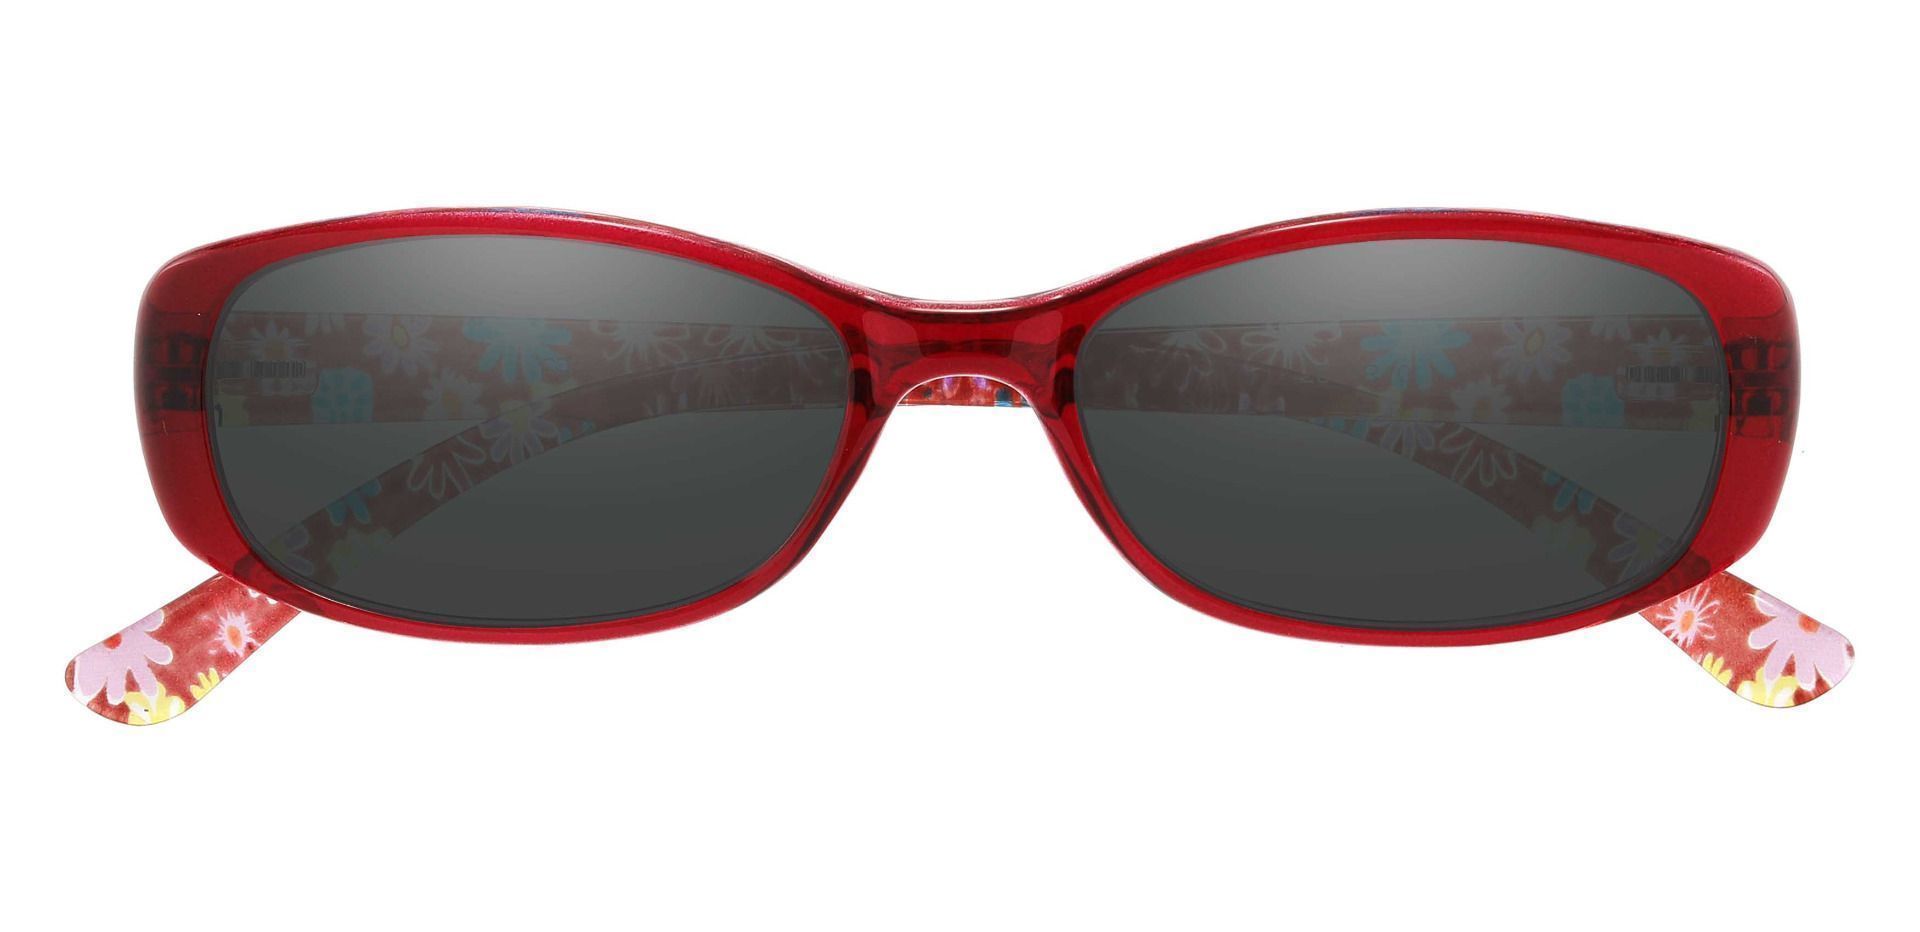 Bethesda Rectangle Reading Sunglasses - Red Frame With Gray Lenses